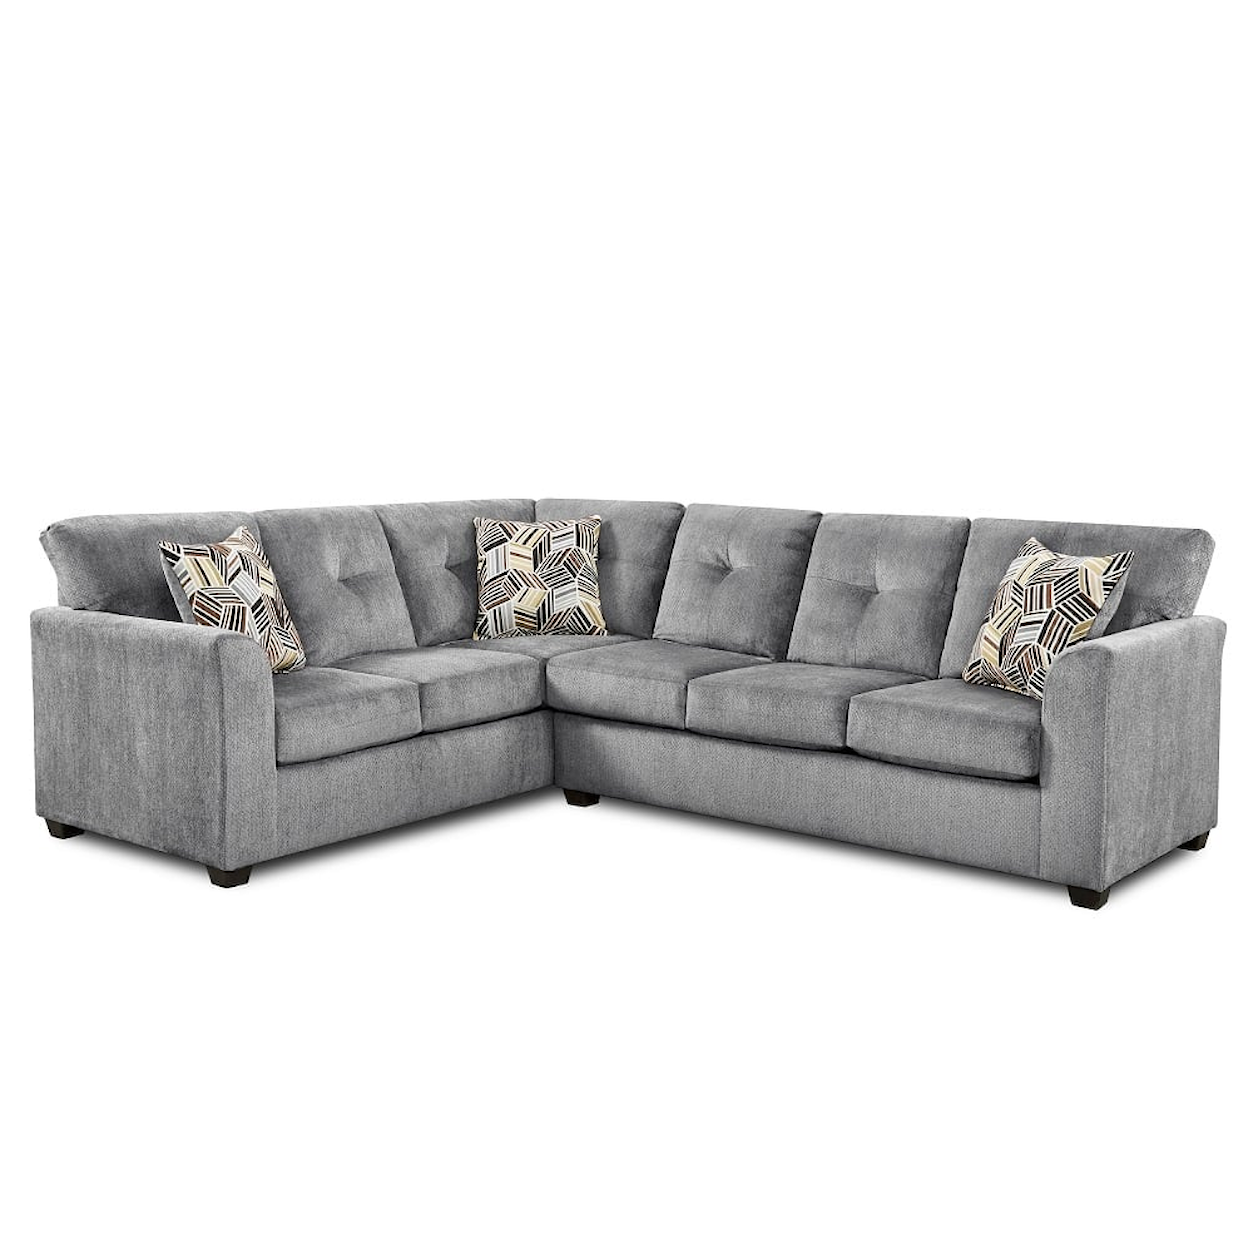 Washington Brothers Furniture Kendall KENDALL GREY 2 PC SECTIONAL |